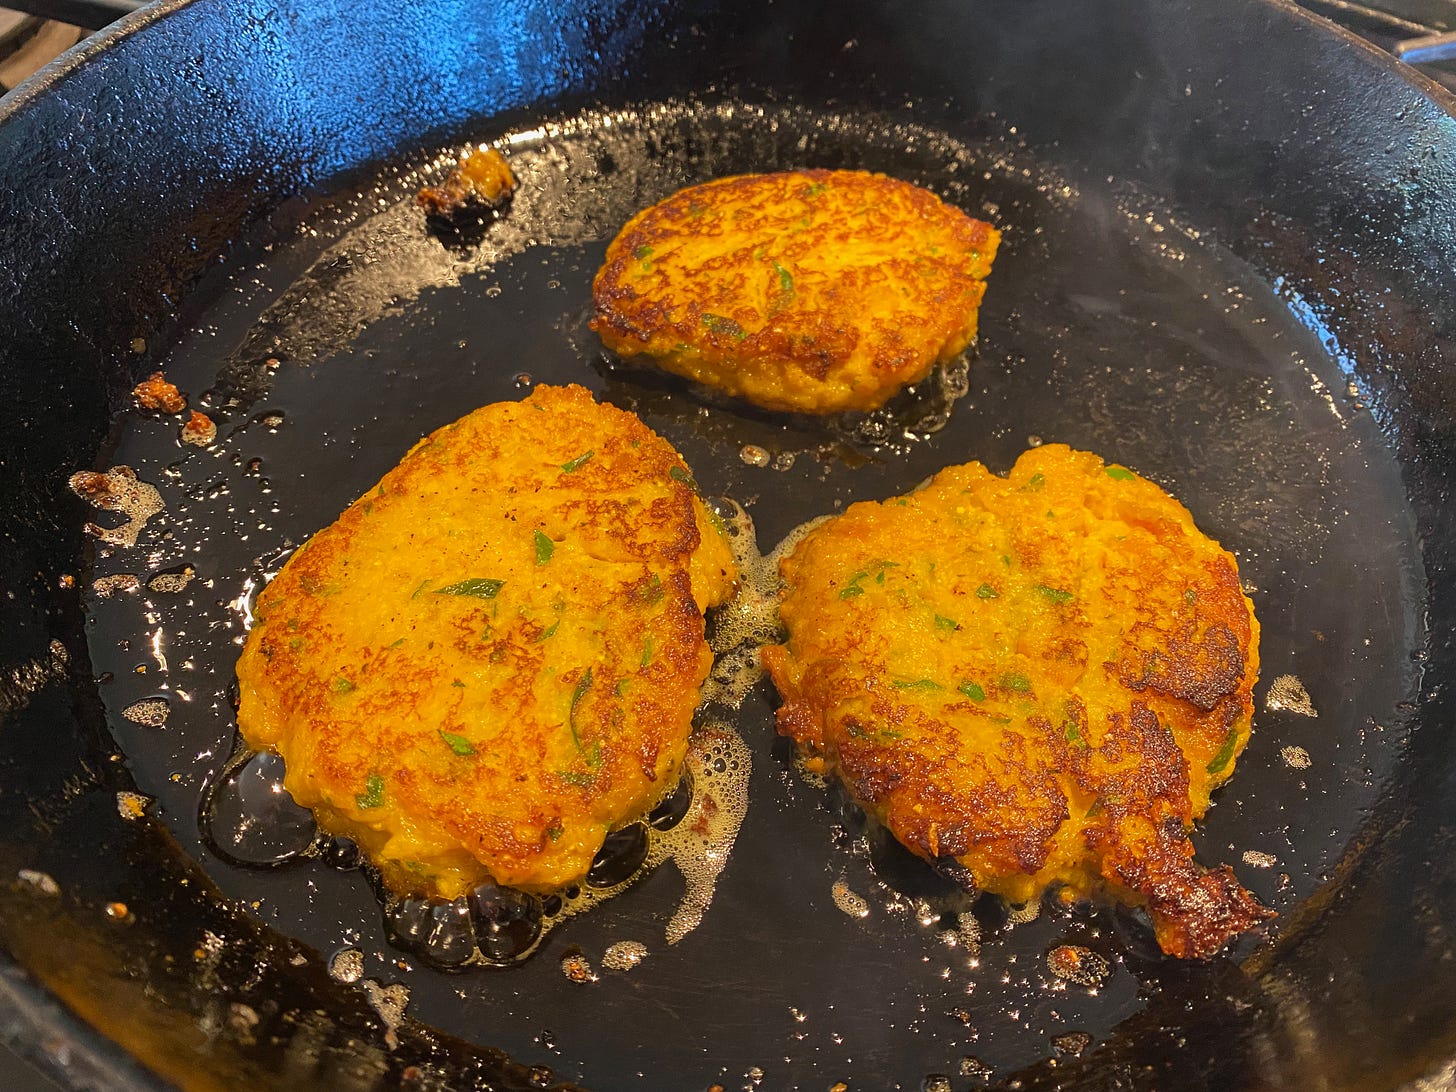 Three golden fritters sizzling in oil in a cast iron frying pan.